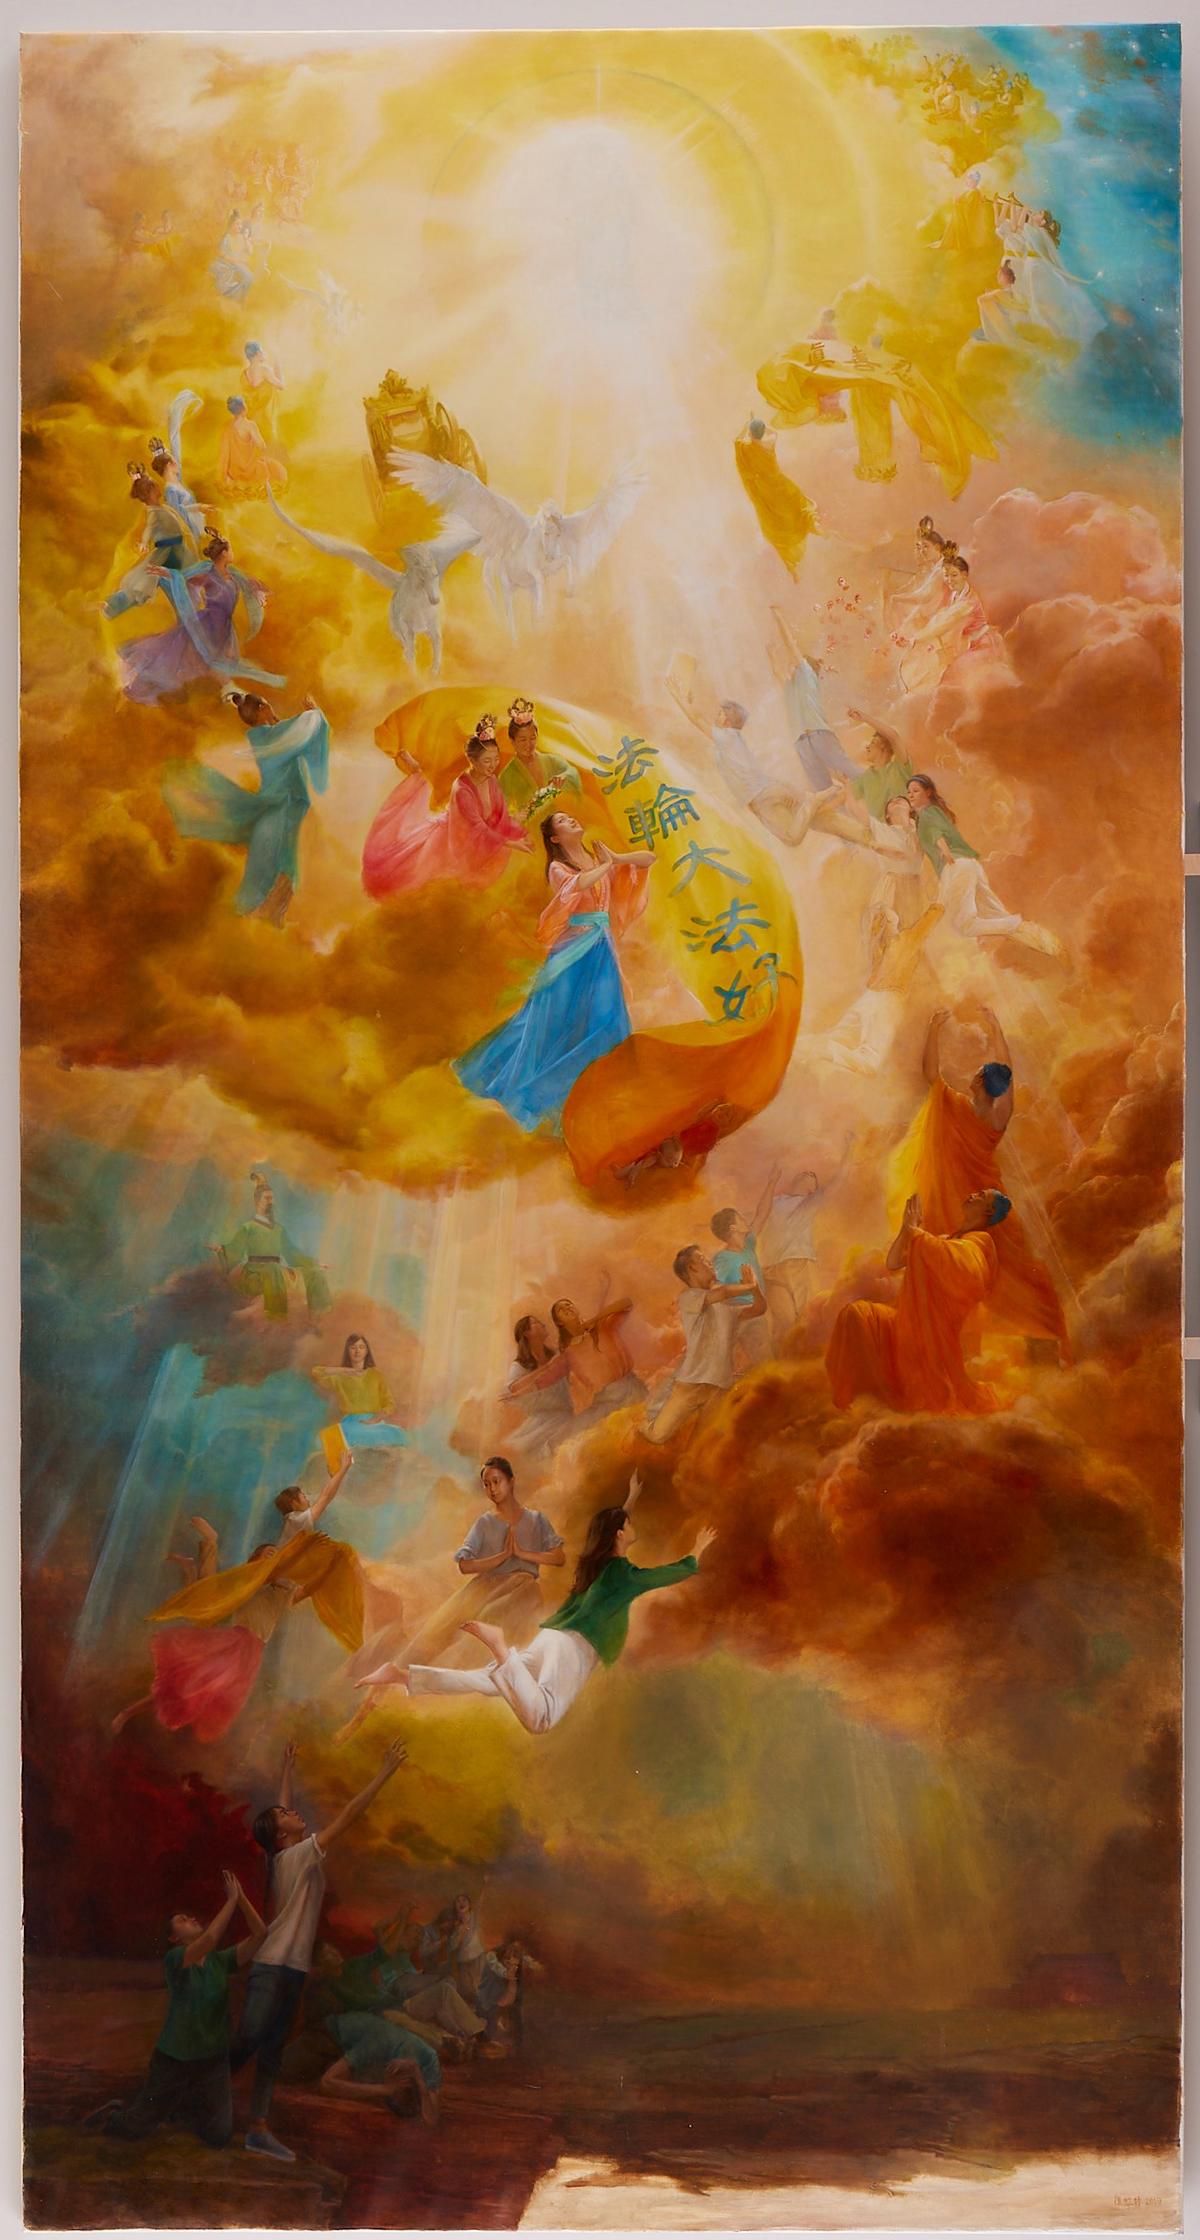 "The Infinite Grace of Buddha (Left)" by Hung-Yu Chen. (NTD International Figure Painting Competition)